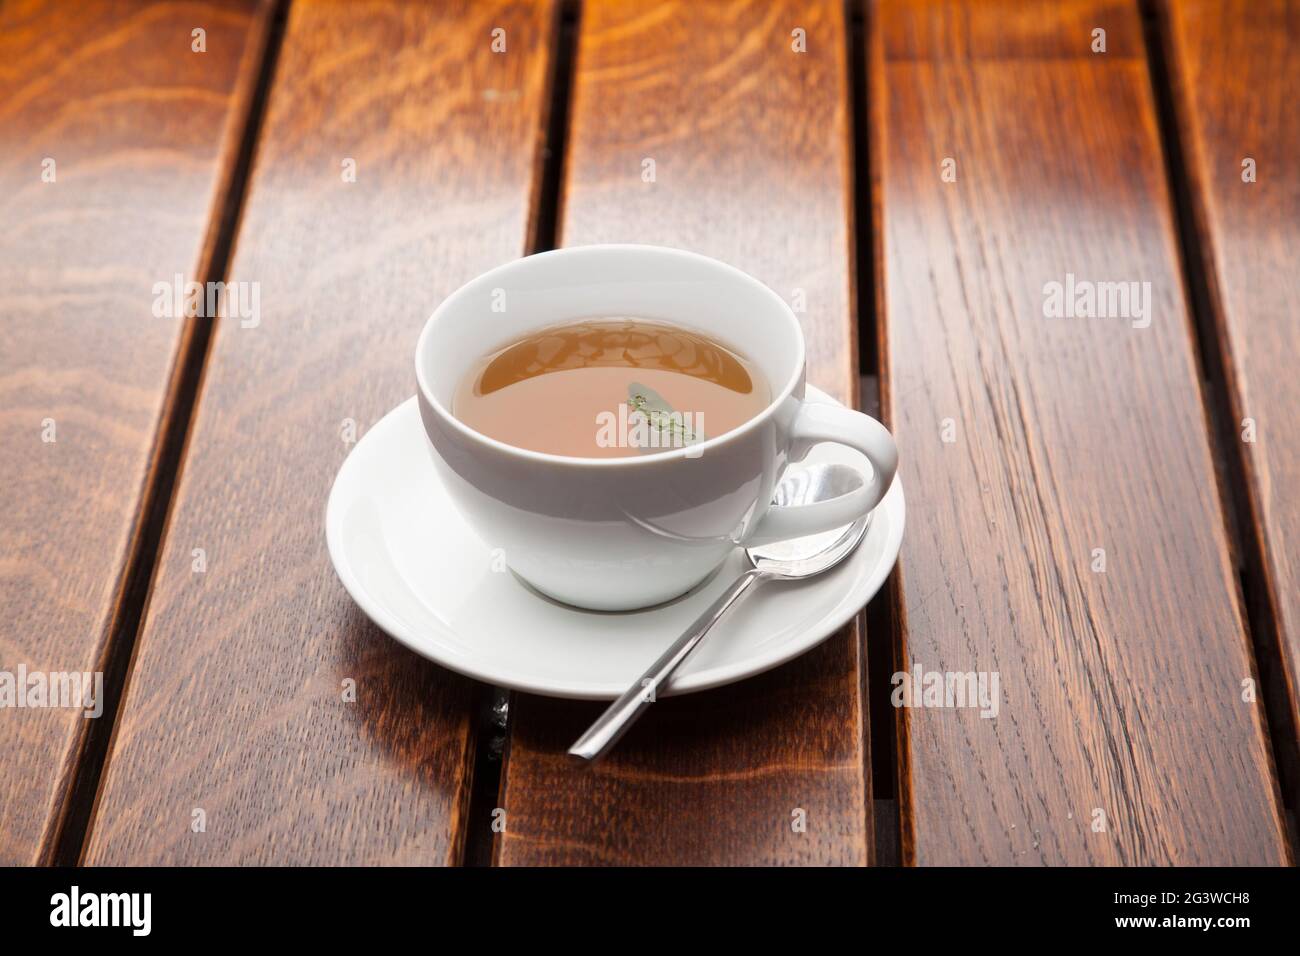 Cup of green tea on wooden table, evening relaxation. Black strong tea in a white mug. Stock Photo